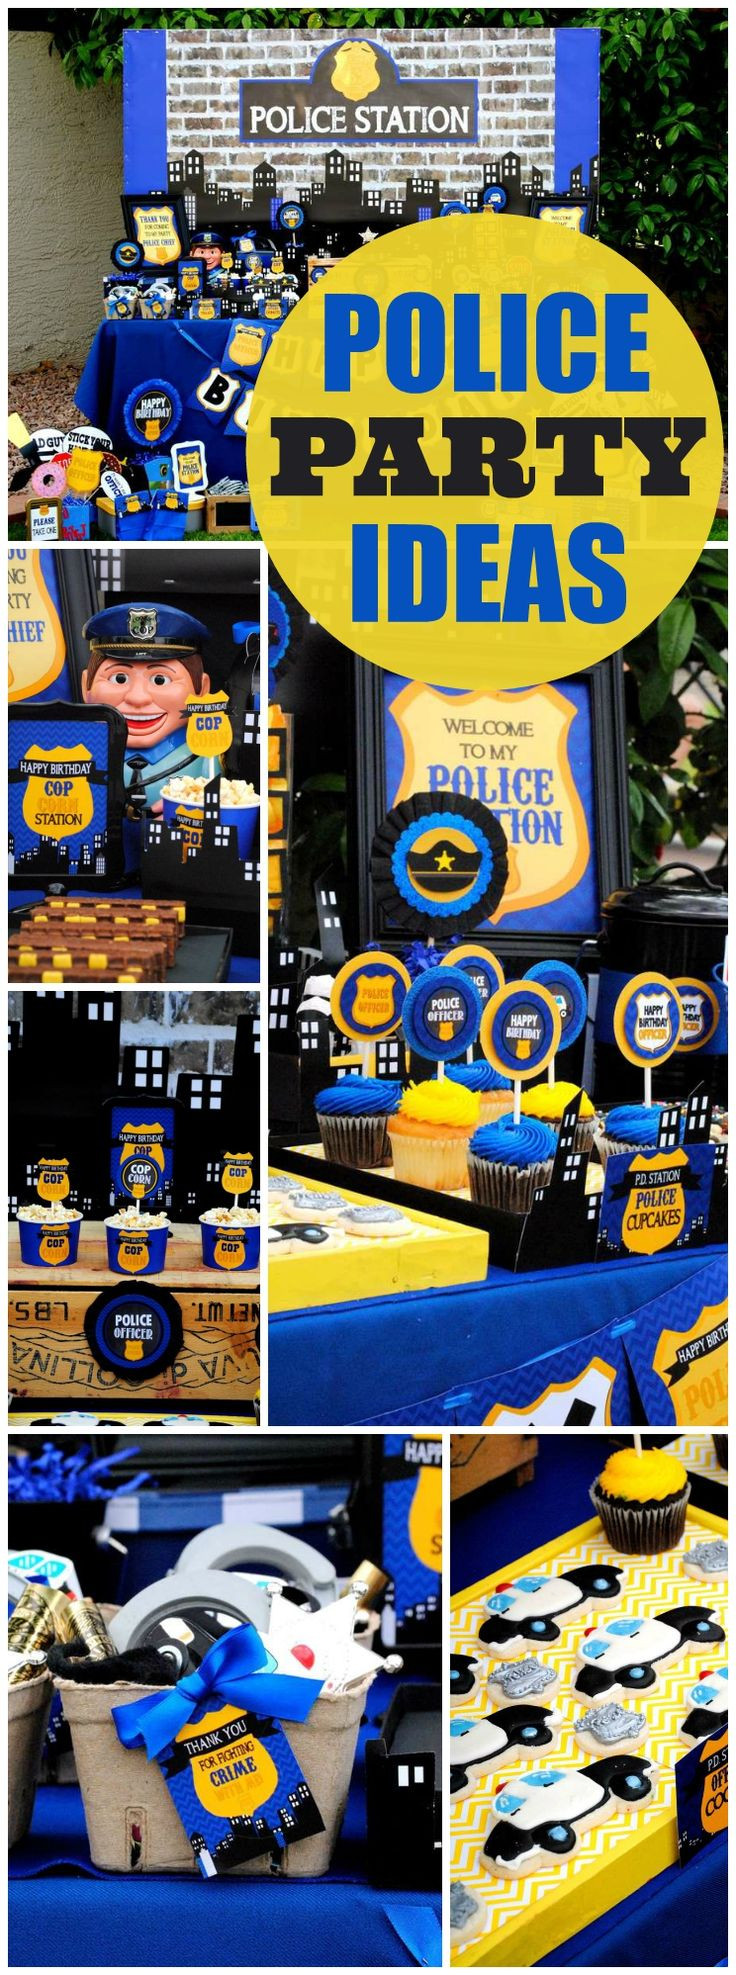 Police Academy Graduation Party Ideas
 17 Best ideas about Police Retirement Party on Pinterest